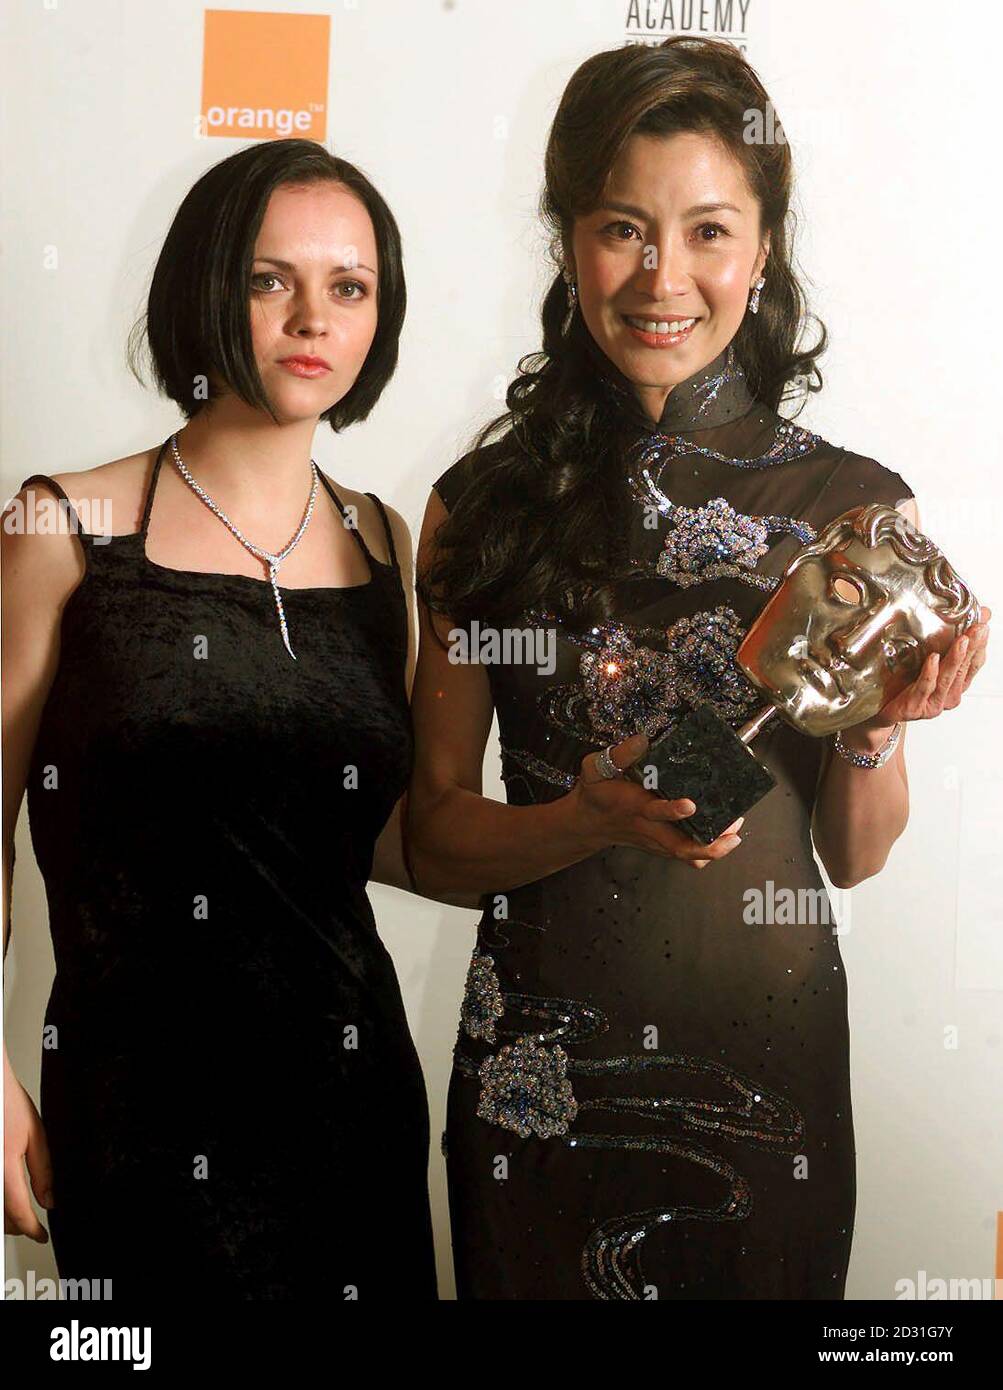 Actress Christina Ricci (left) and actress Michelle Yeoh with one of the four awards won by Crouching Tiger, Hidden Dragon, during The Orange British Academy Film Awards at the Odeon in London's Leicester Square.   *   The ceremony has been brought forward several weeks from previous years to give it a more prominent position in the film calendar. Stock Photo